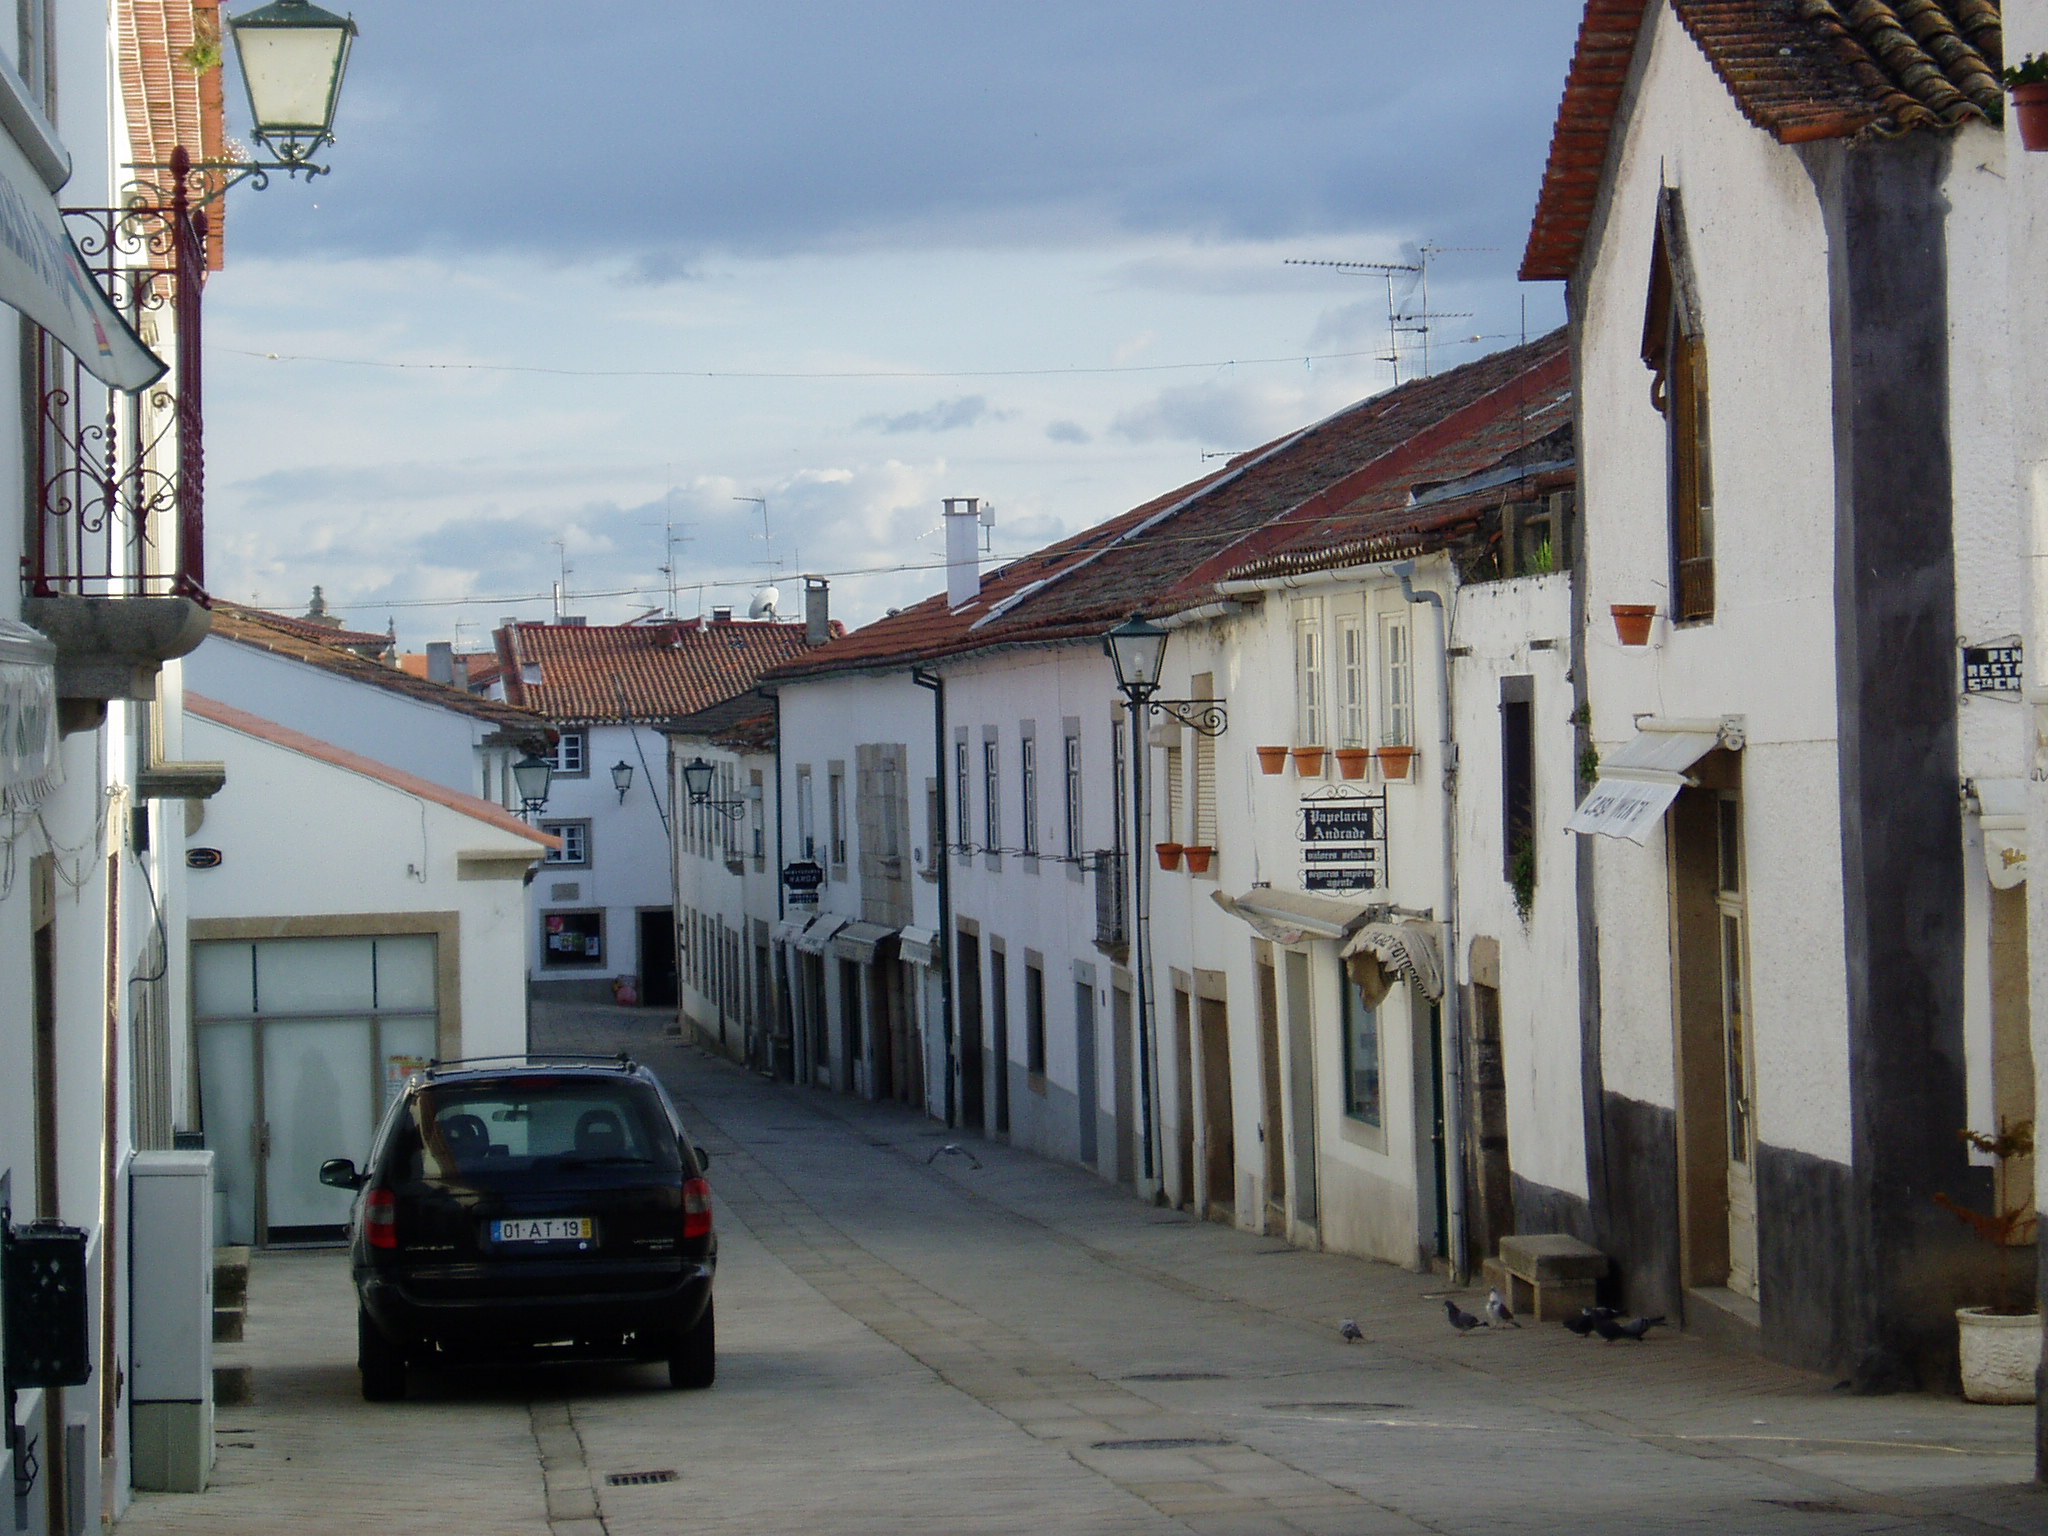 the car is driving down the narrow, old town street